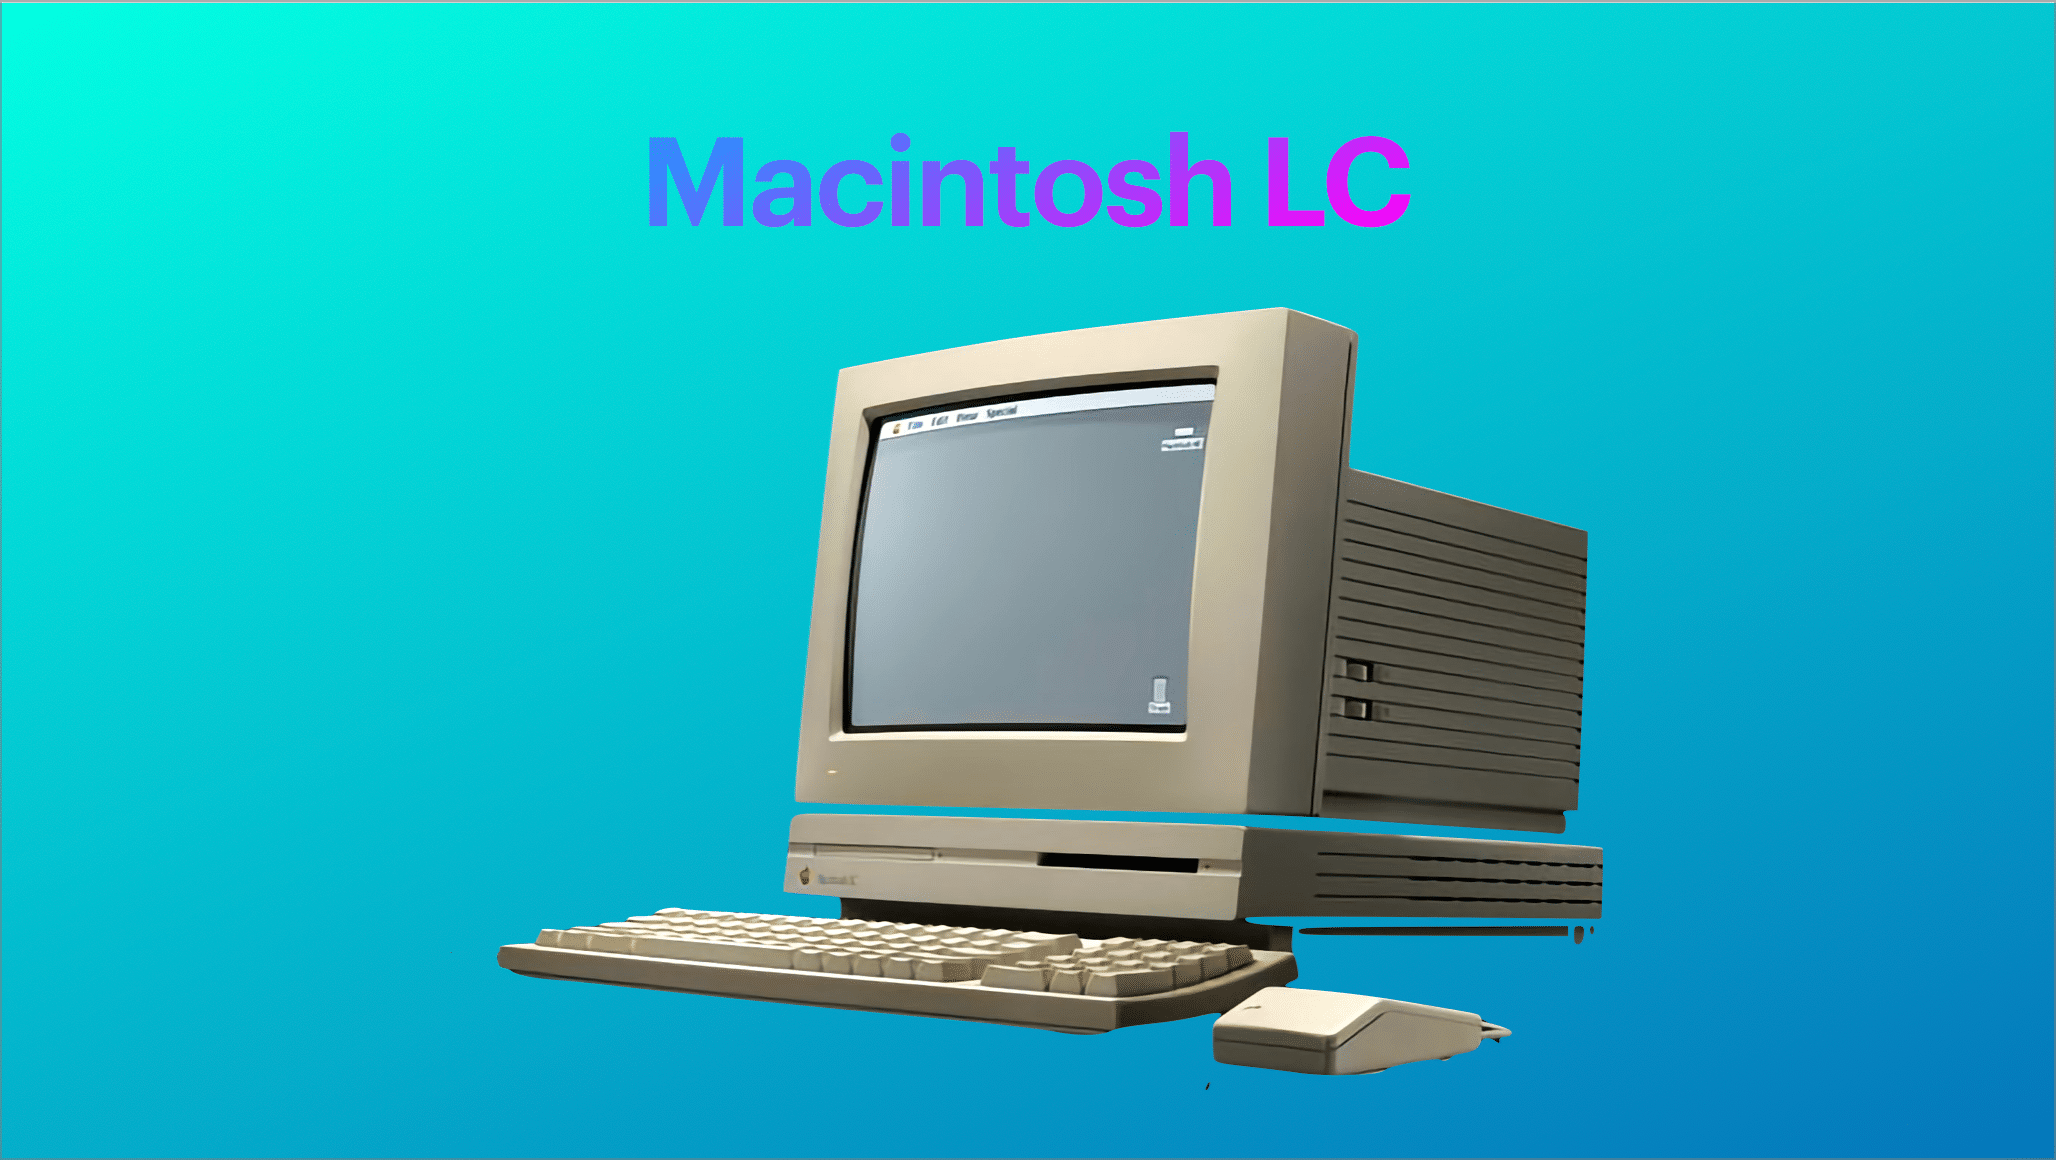 Remembering My Story of Owning a Macintosh LC — 1991-1992